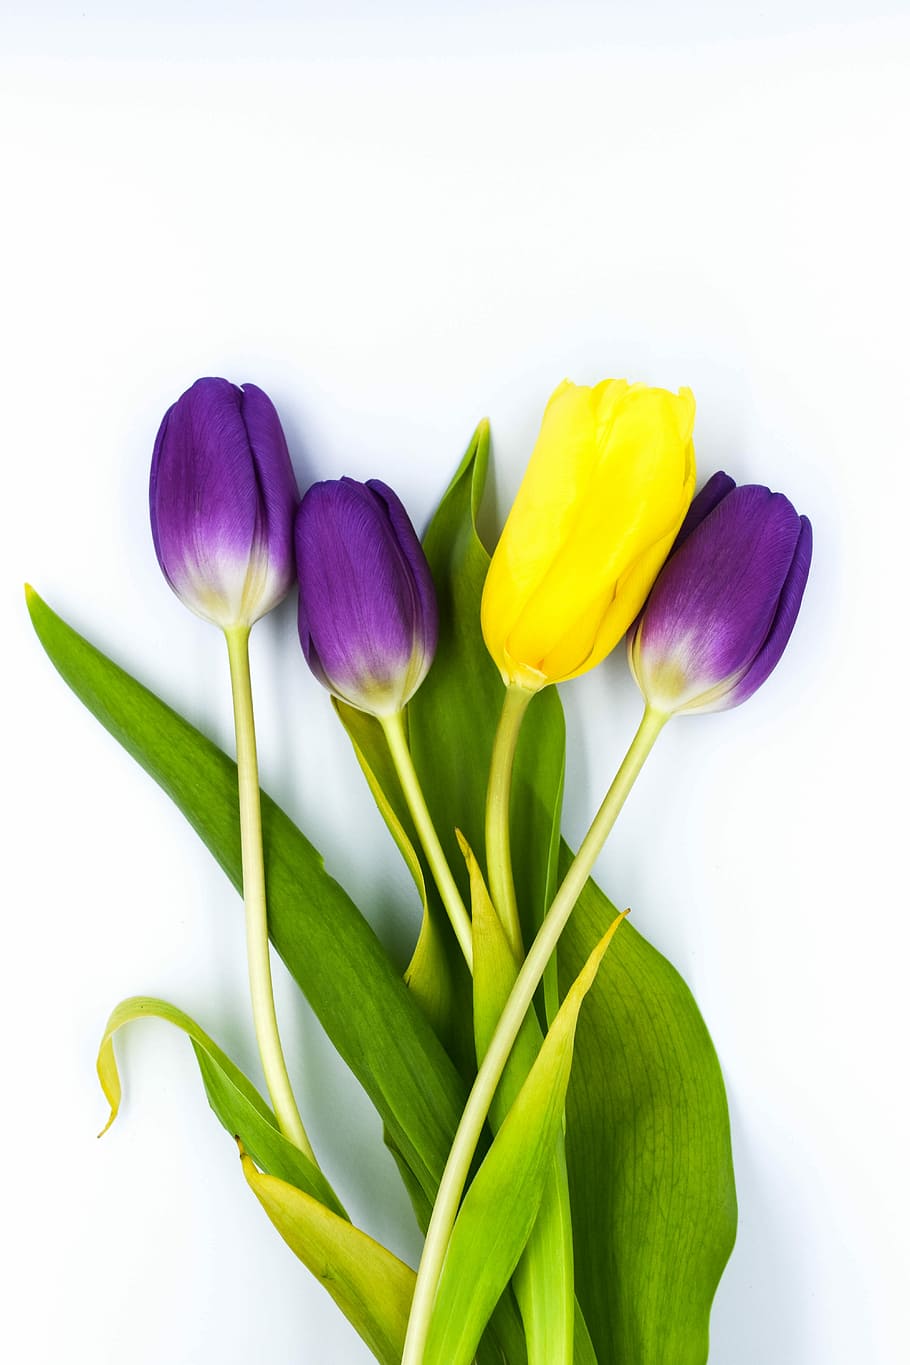 three purple and one yellow tulip flowers, nature, easter, plant